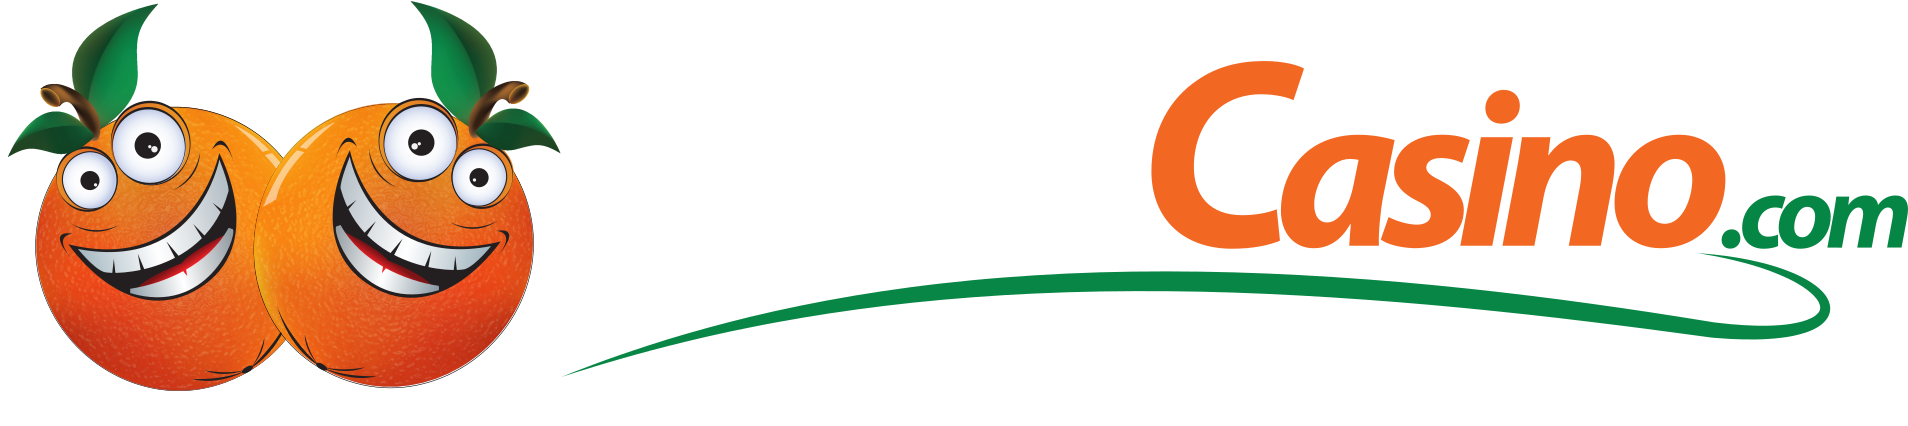 Casino as One of the Secure Online Gambling Websites Listed with unlimited bonus and payout